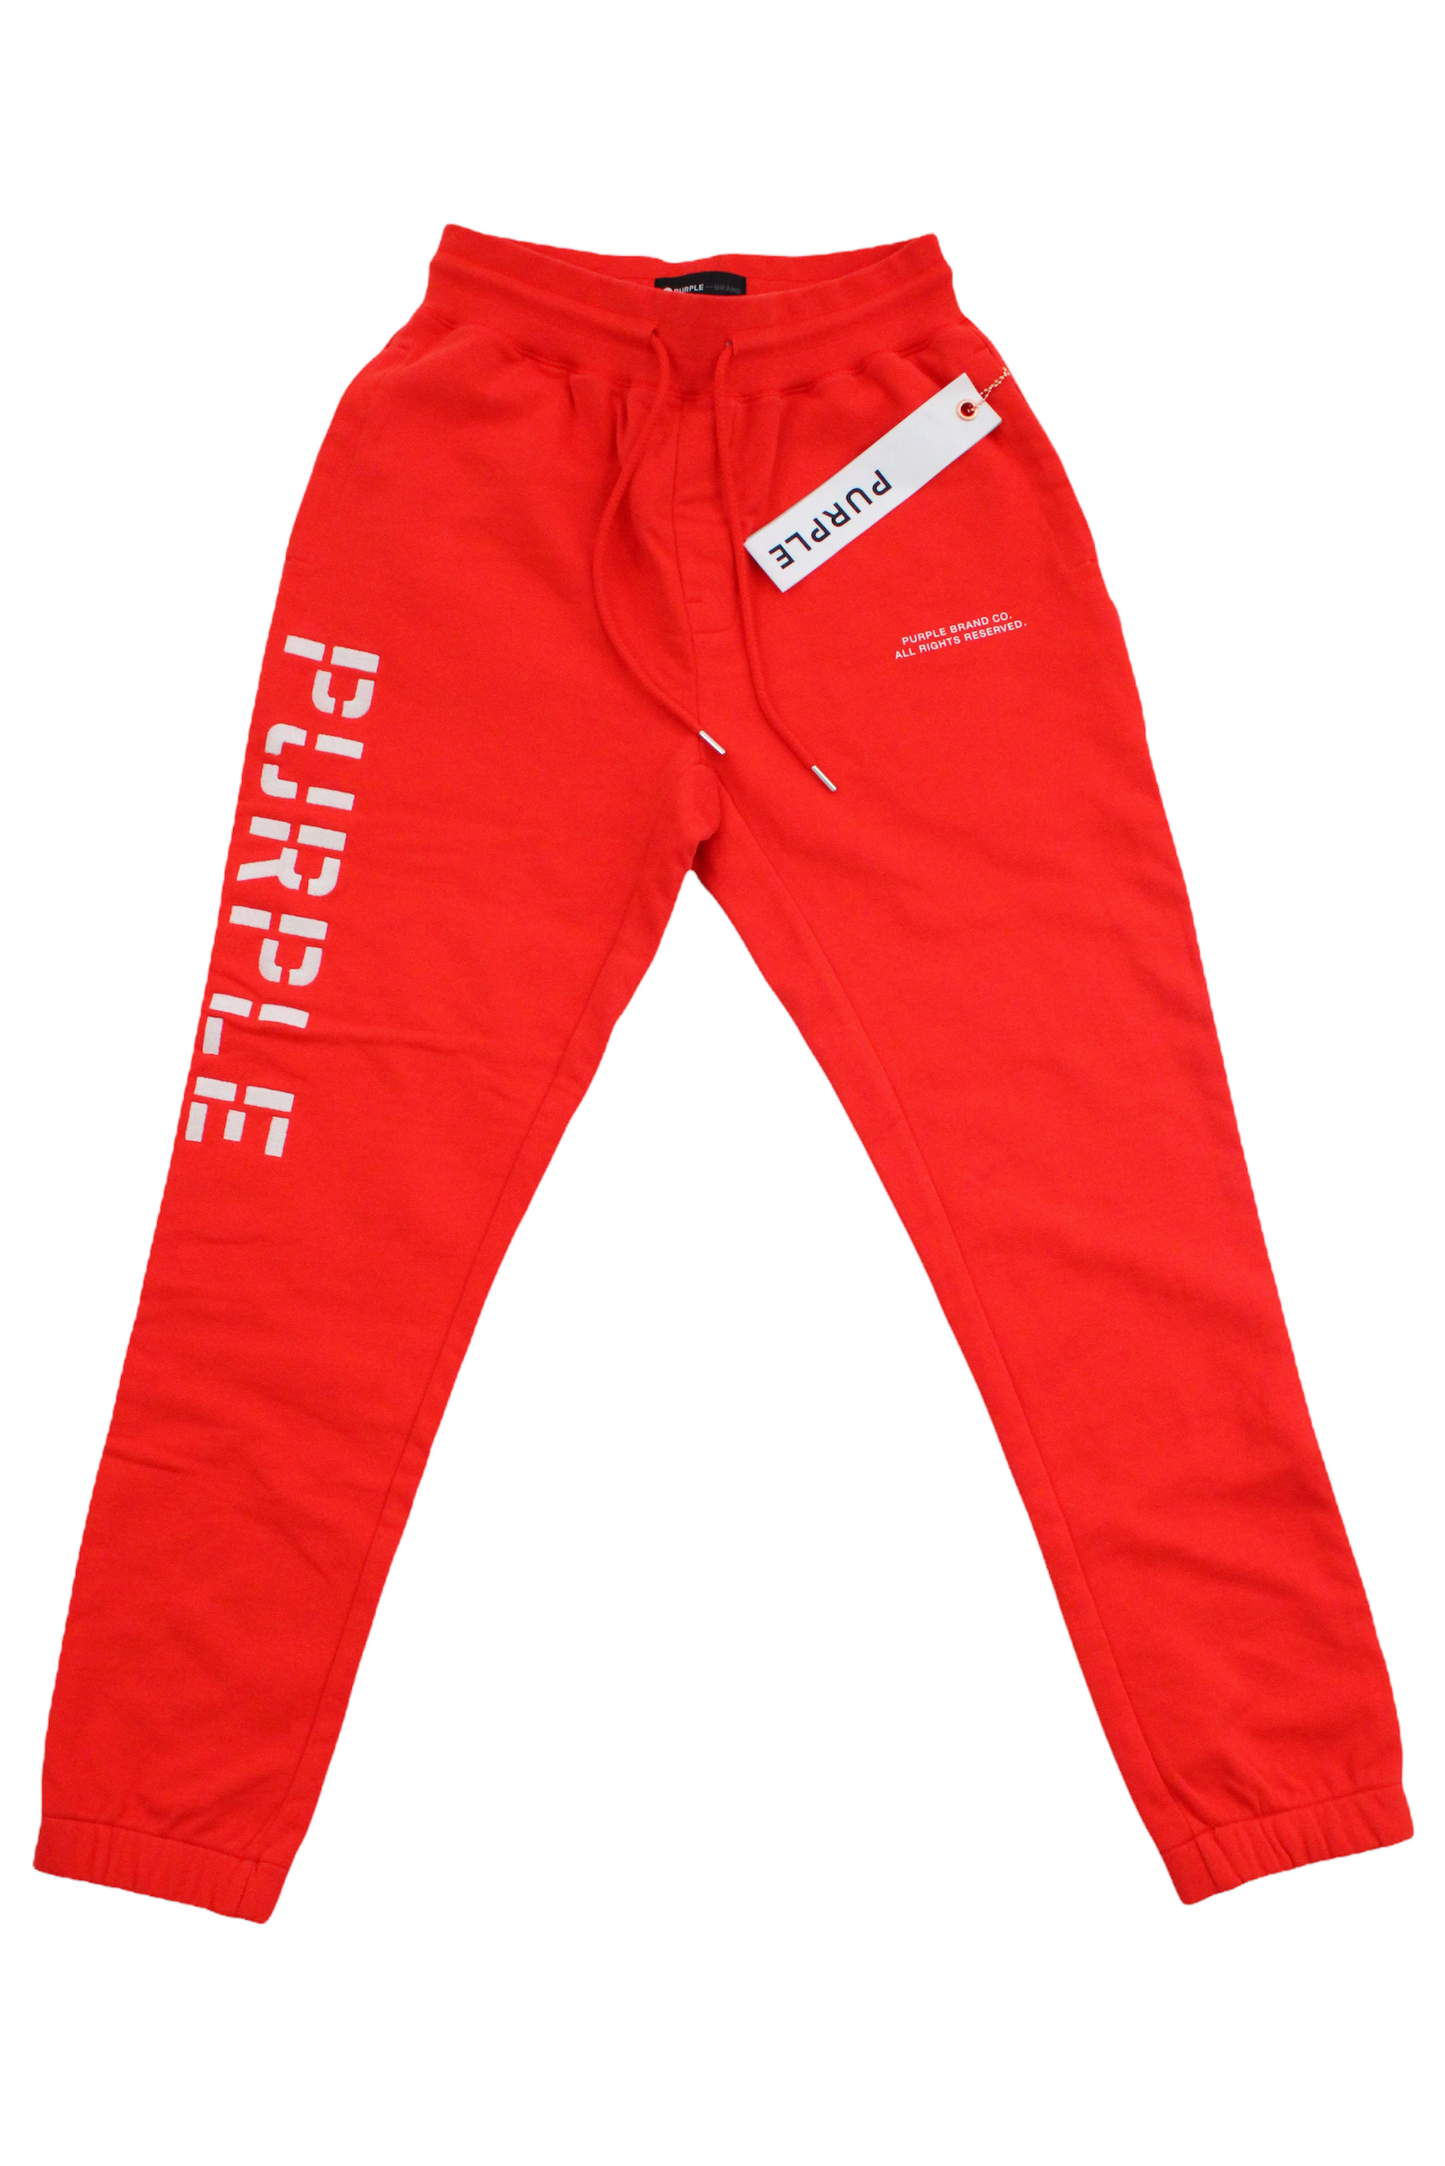 Purple Brand French Terry Red Embroidered Logo Joggers